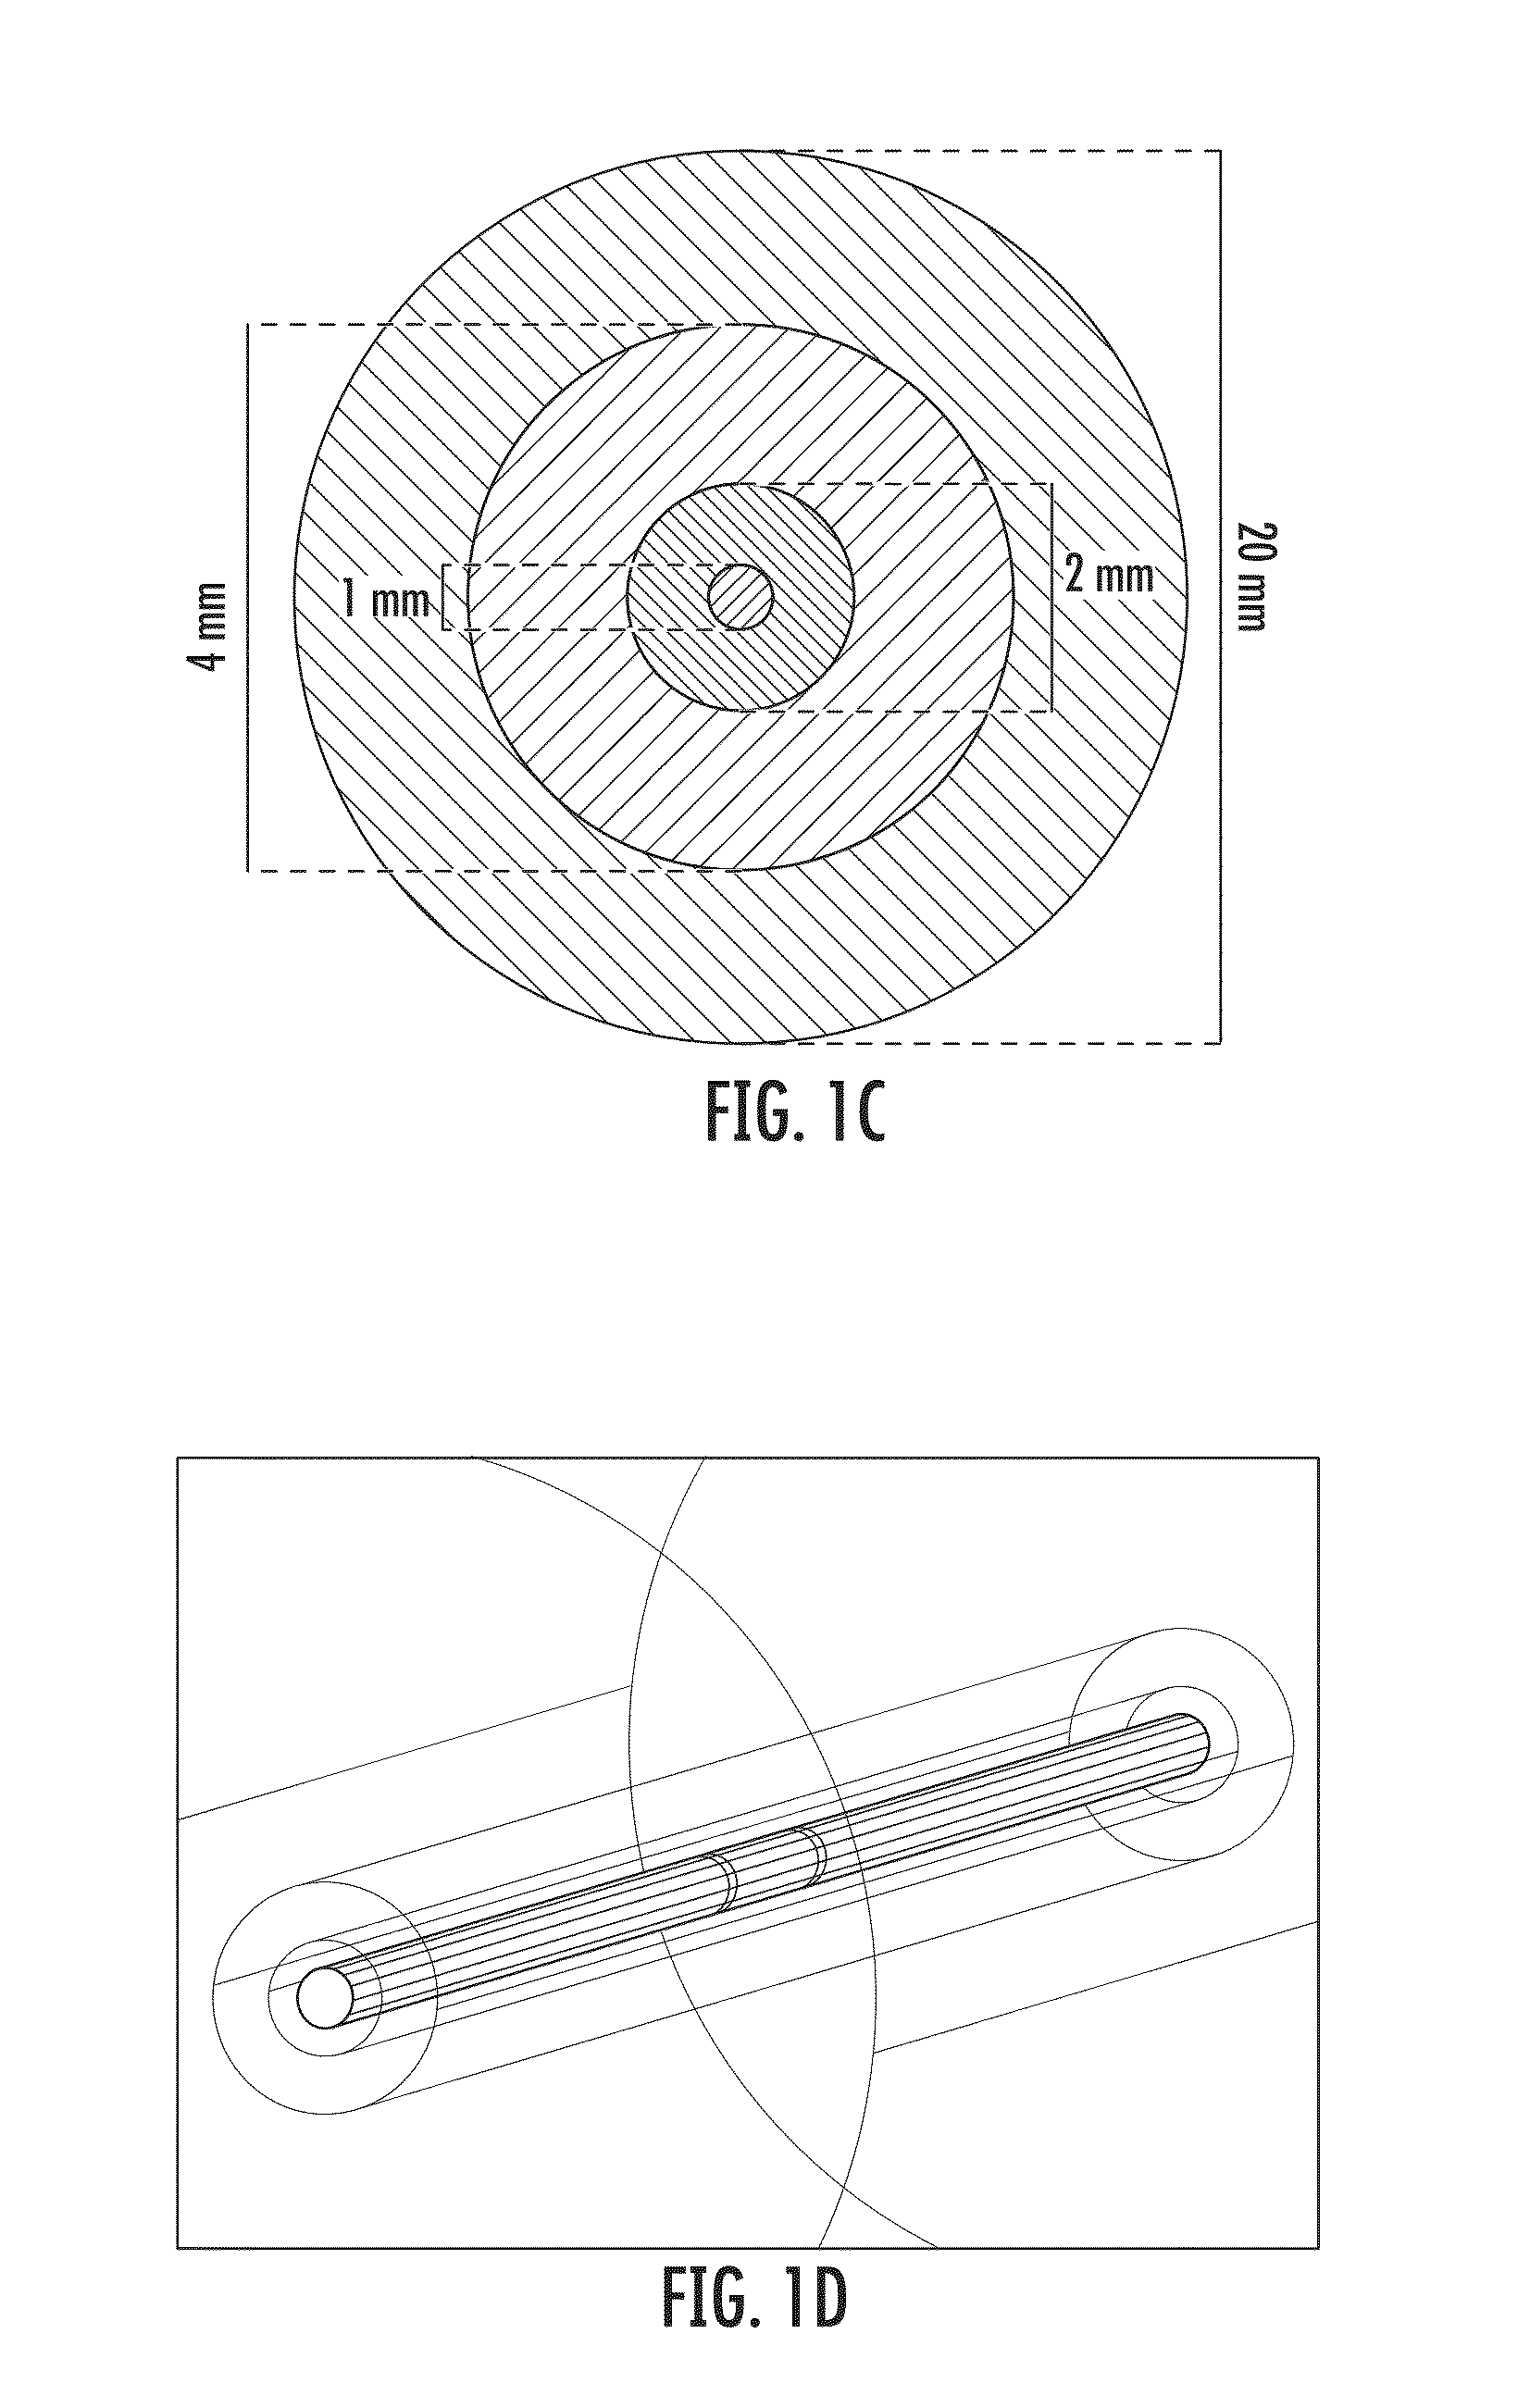 Device and Method for Electroporation Based Treatment of Stenosis of a Tubular Body Part